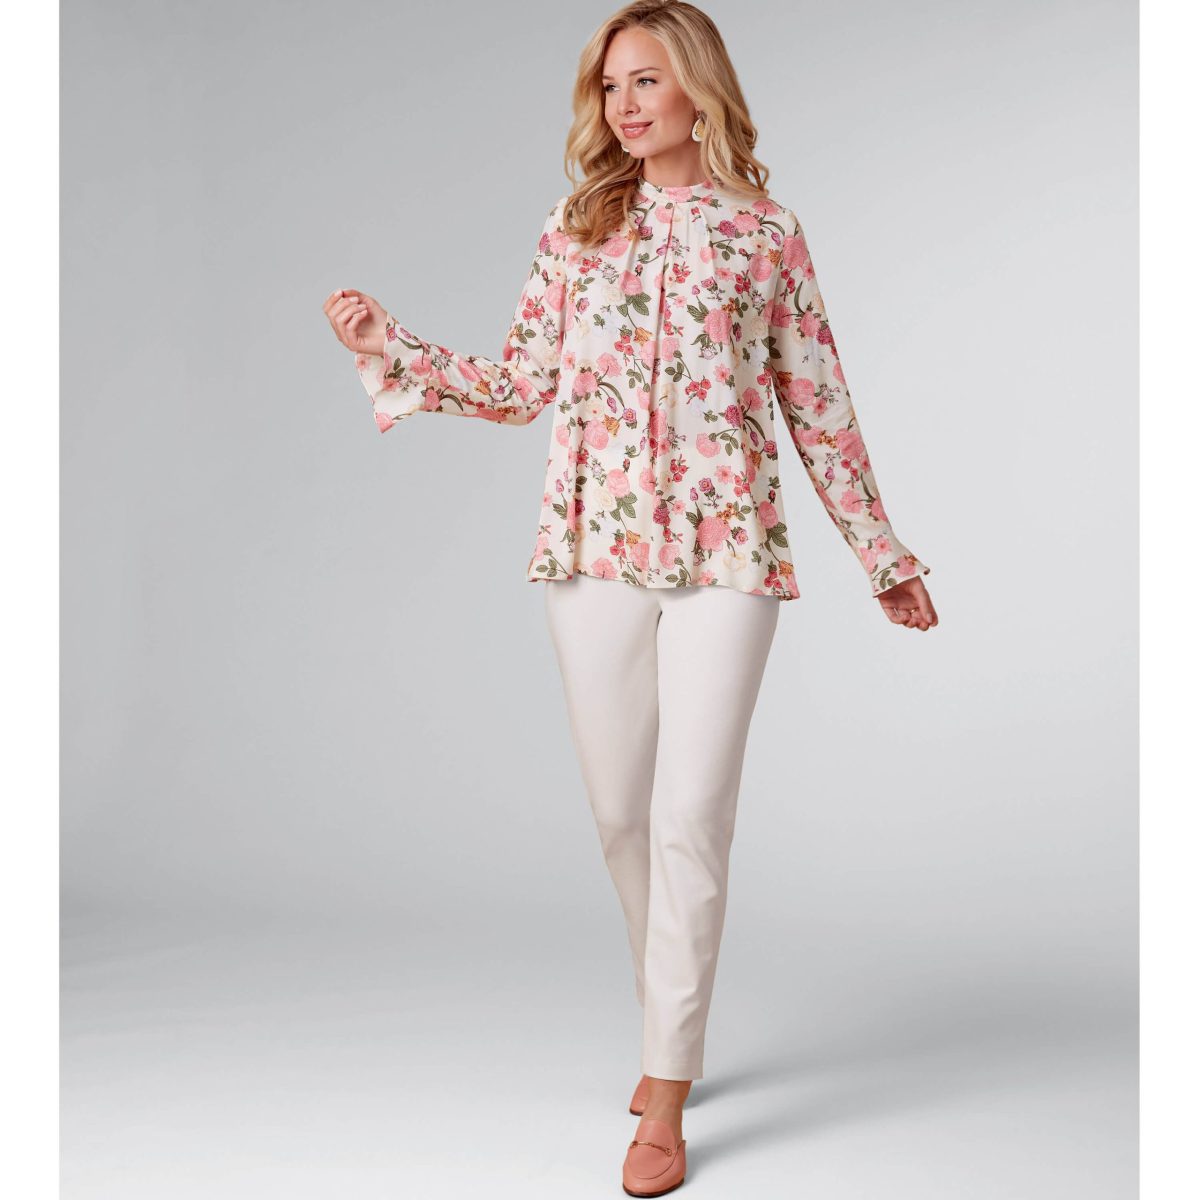 New Look Sewing Pattern N6712 Misses' Top and Trousers